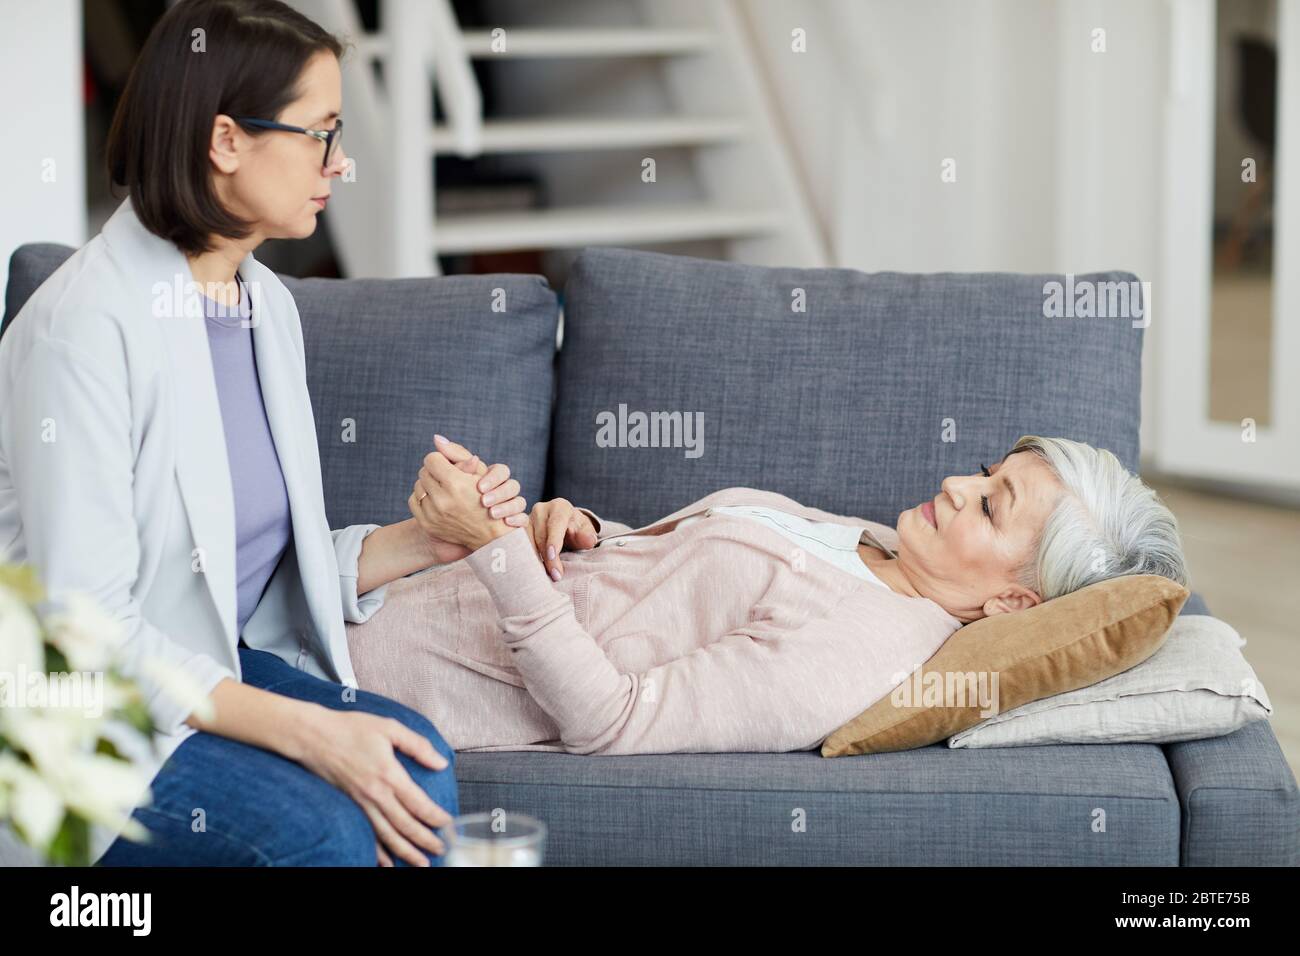 Side view portrait of senior woman lying on couch with young daughter holding her hand and supporting mother, copy space Stock Photo